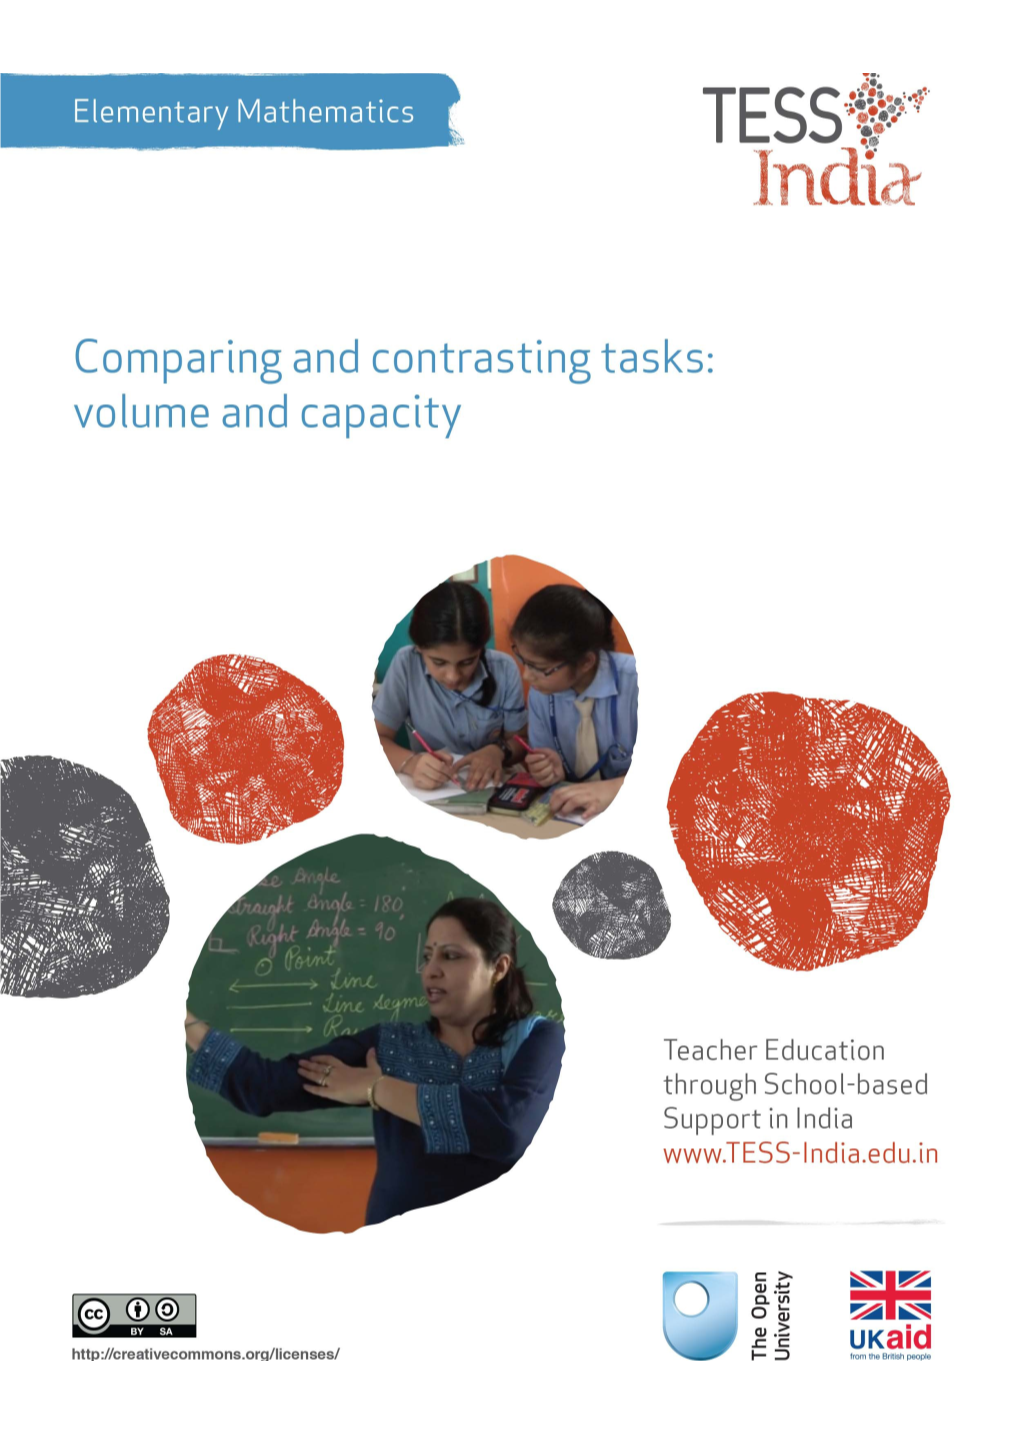 TESS-India (Teacher Education Through School-Based Support) Aims to Improve the Classroom s3